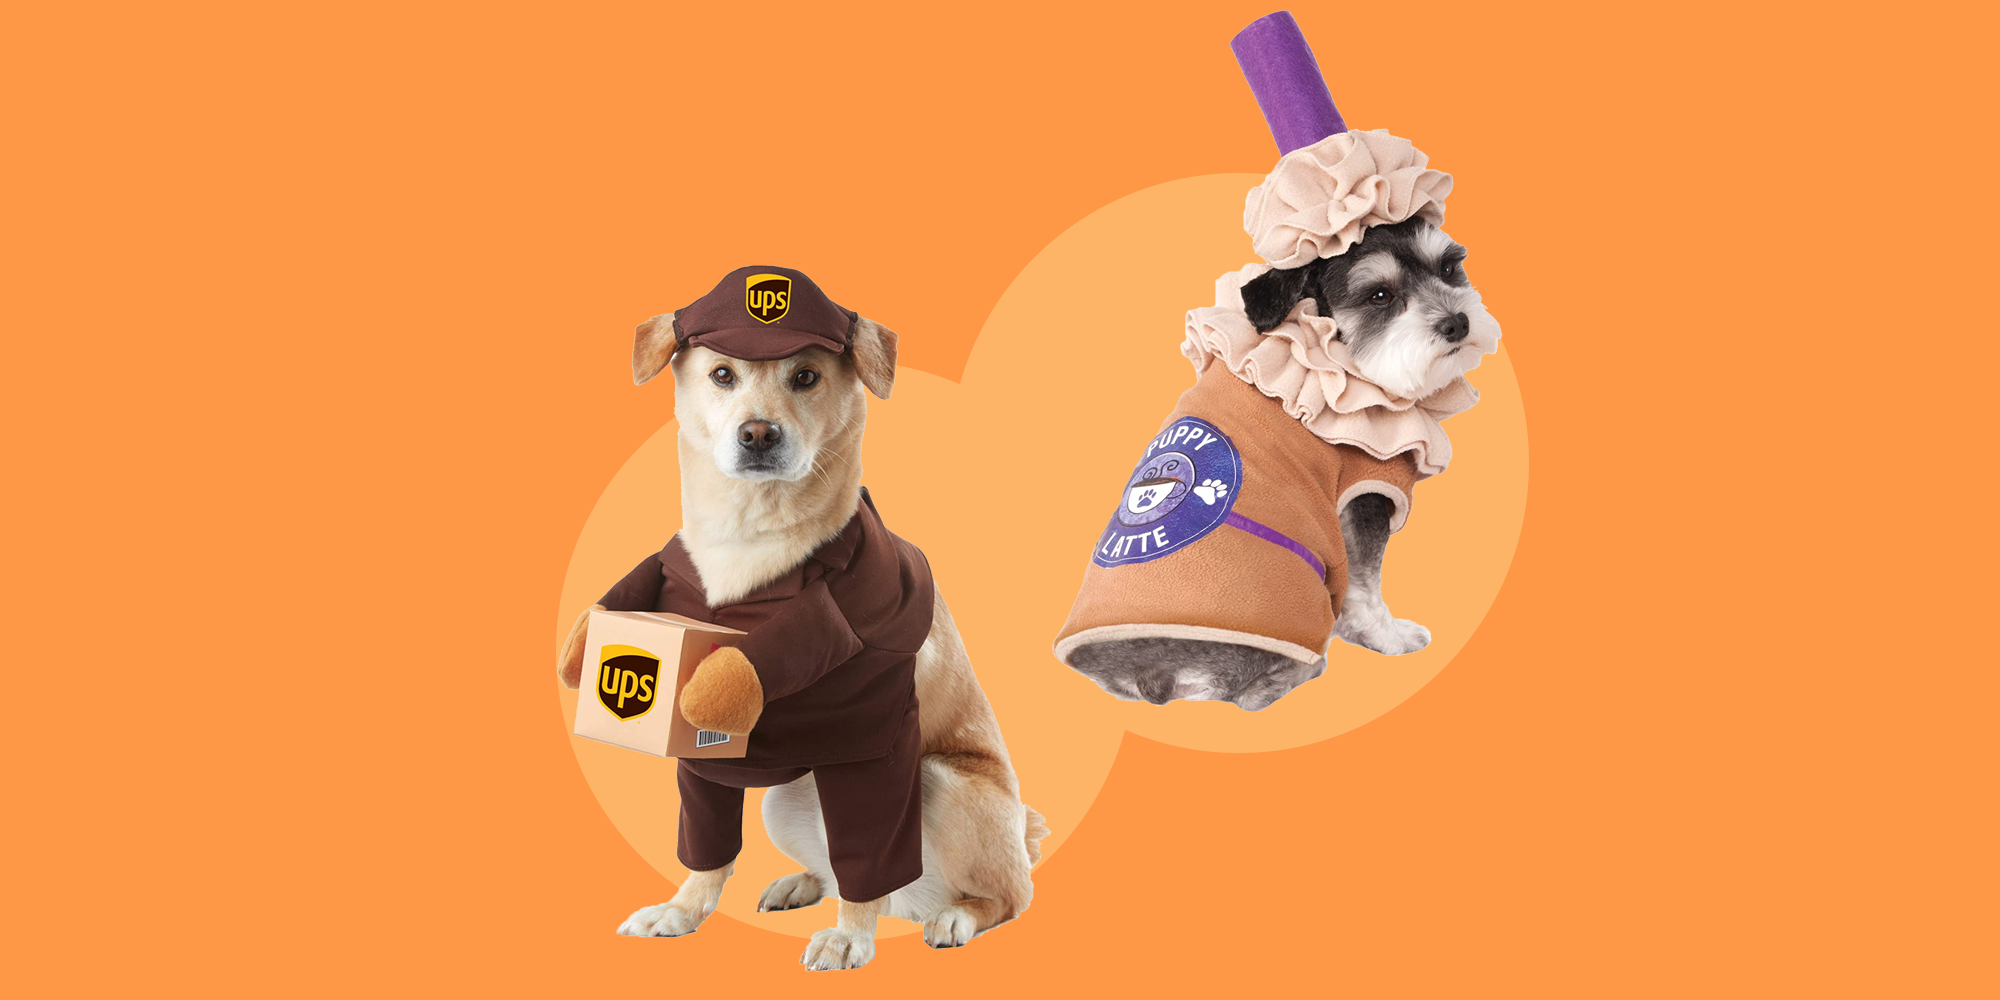 Scary Dog Costumes For Halloween